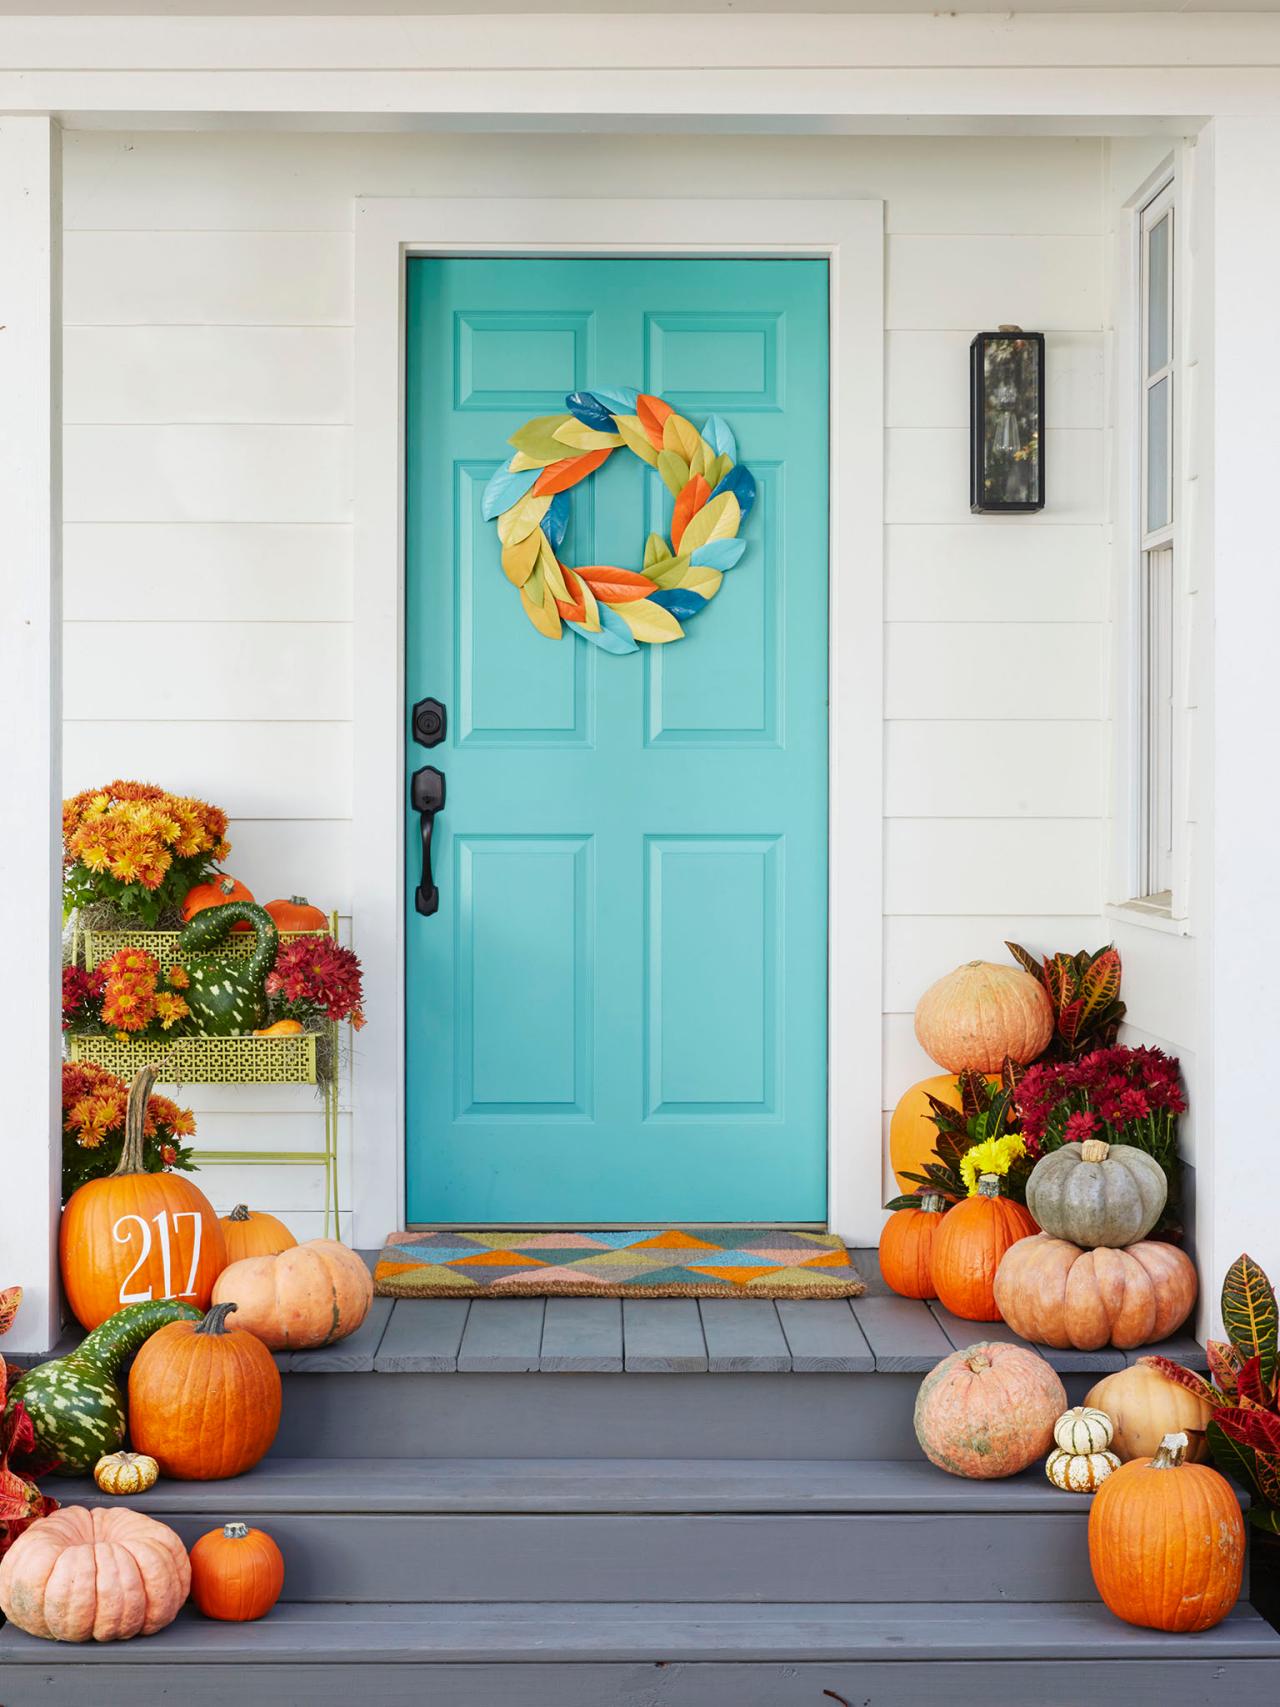 5 Tips For Fall Porch Decorating Hgtv S Decorating Design Blog